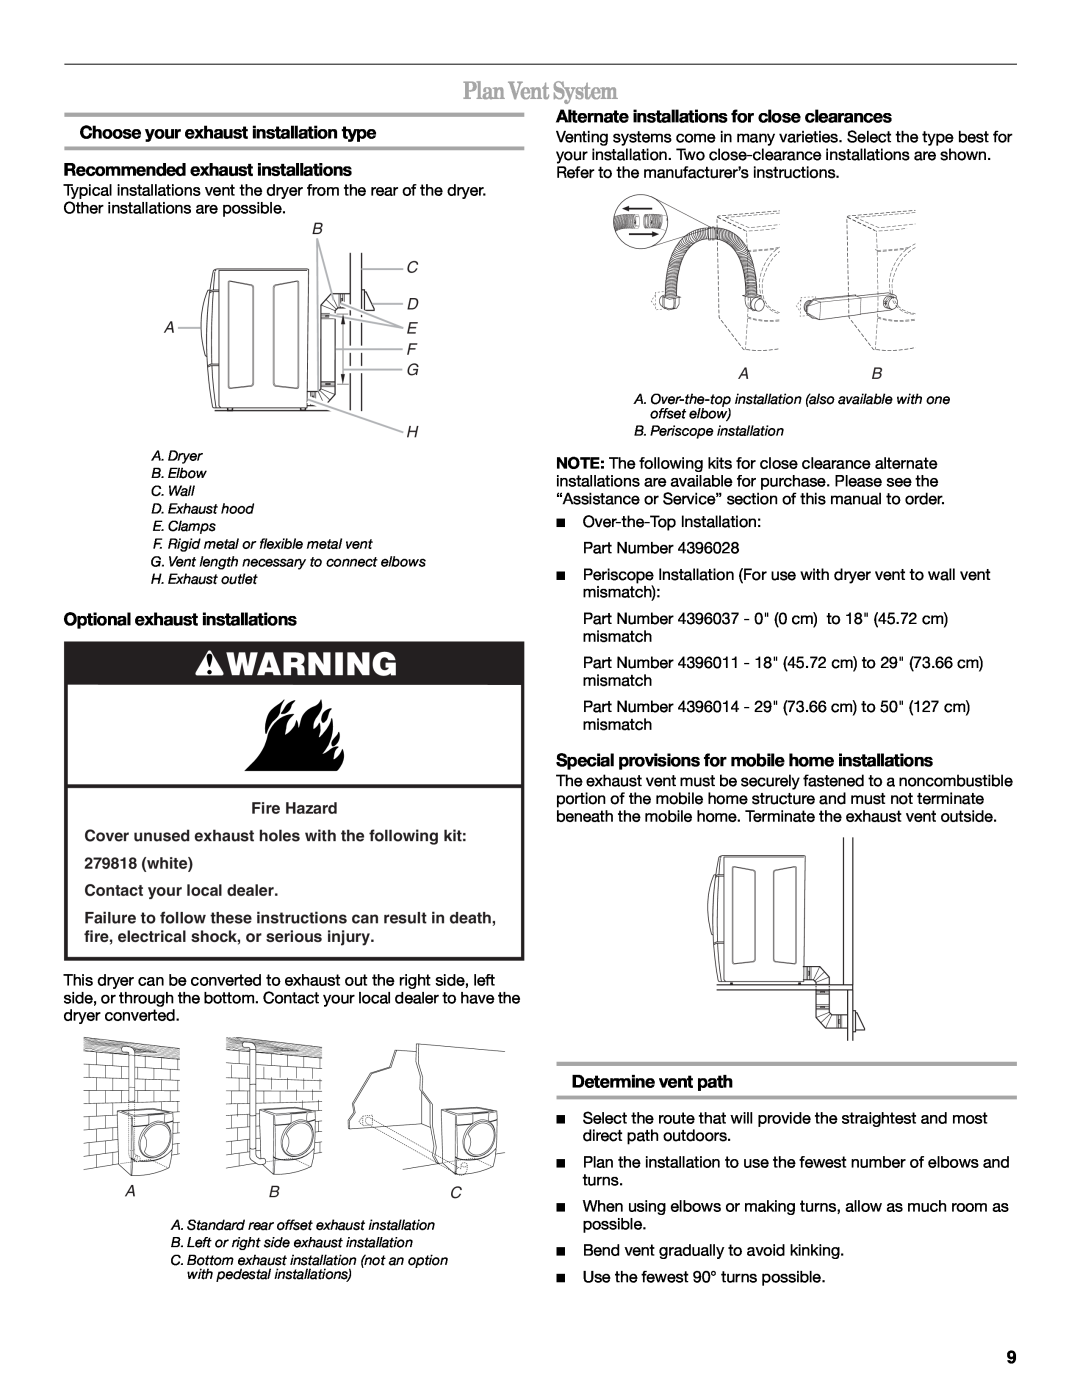 Whirlpool 8578901 manual Plan VentSystem, Choose your exhaust installation type, Recommended exhaust installations 